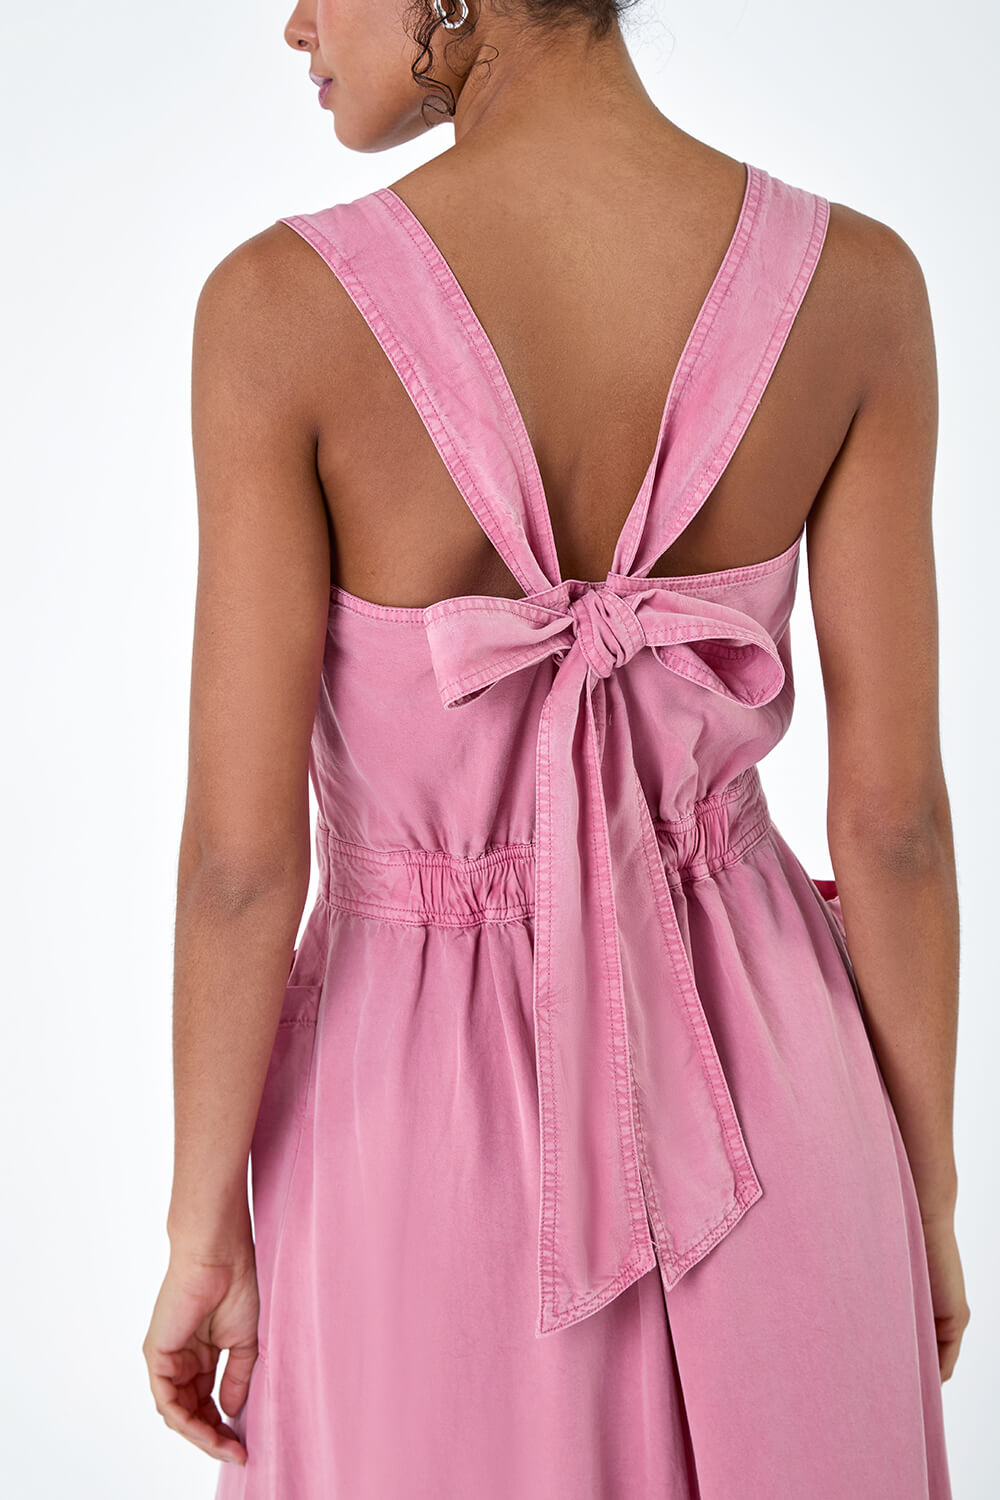 PINK Dyed Strappy Pocket Dress, Image 5 of 5